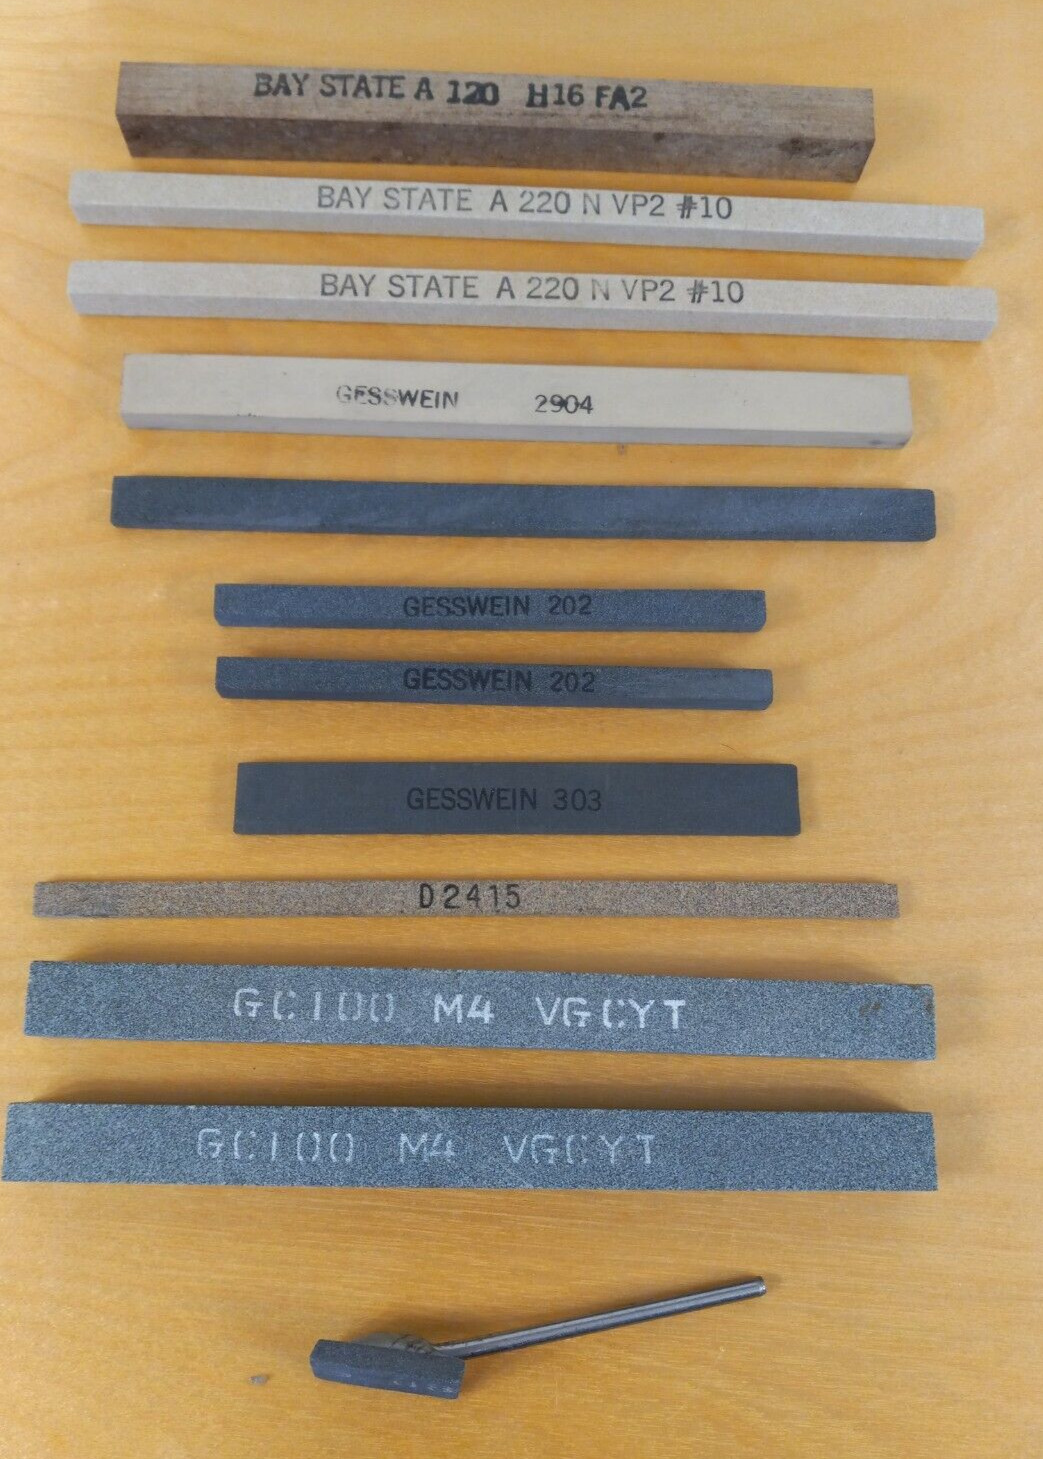 Lot of 12 New Vintage Gesswein, Bay State Sharpening Stones - Made in USA